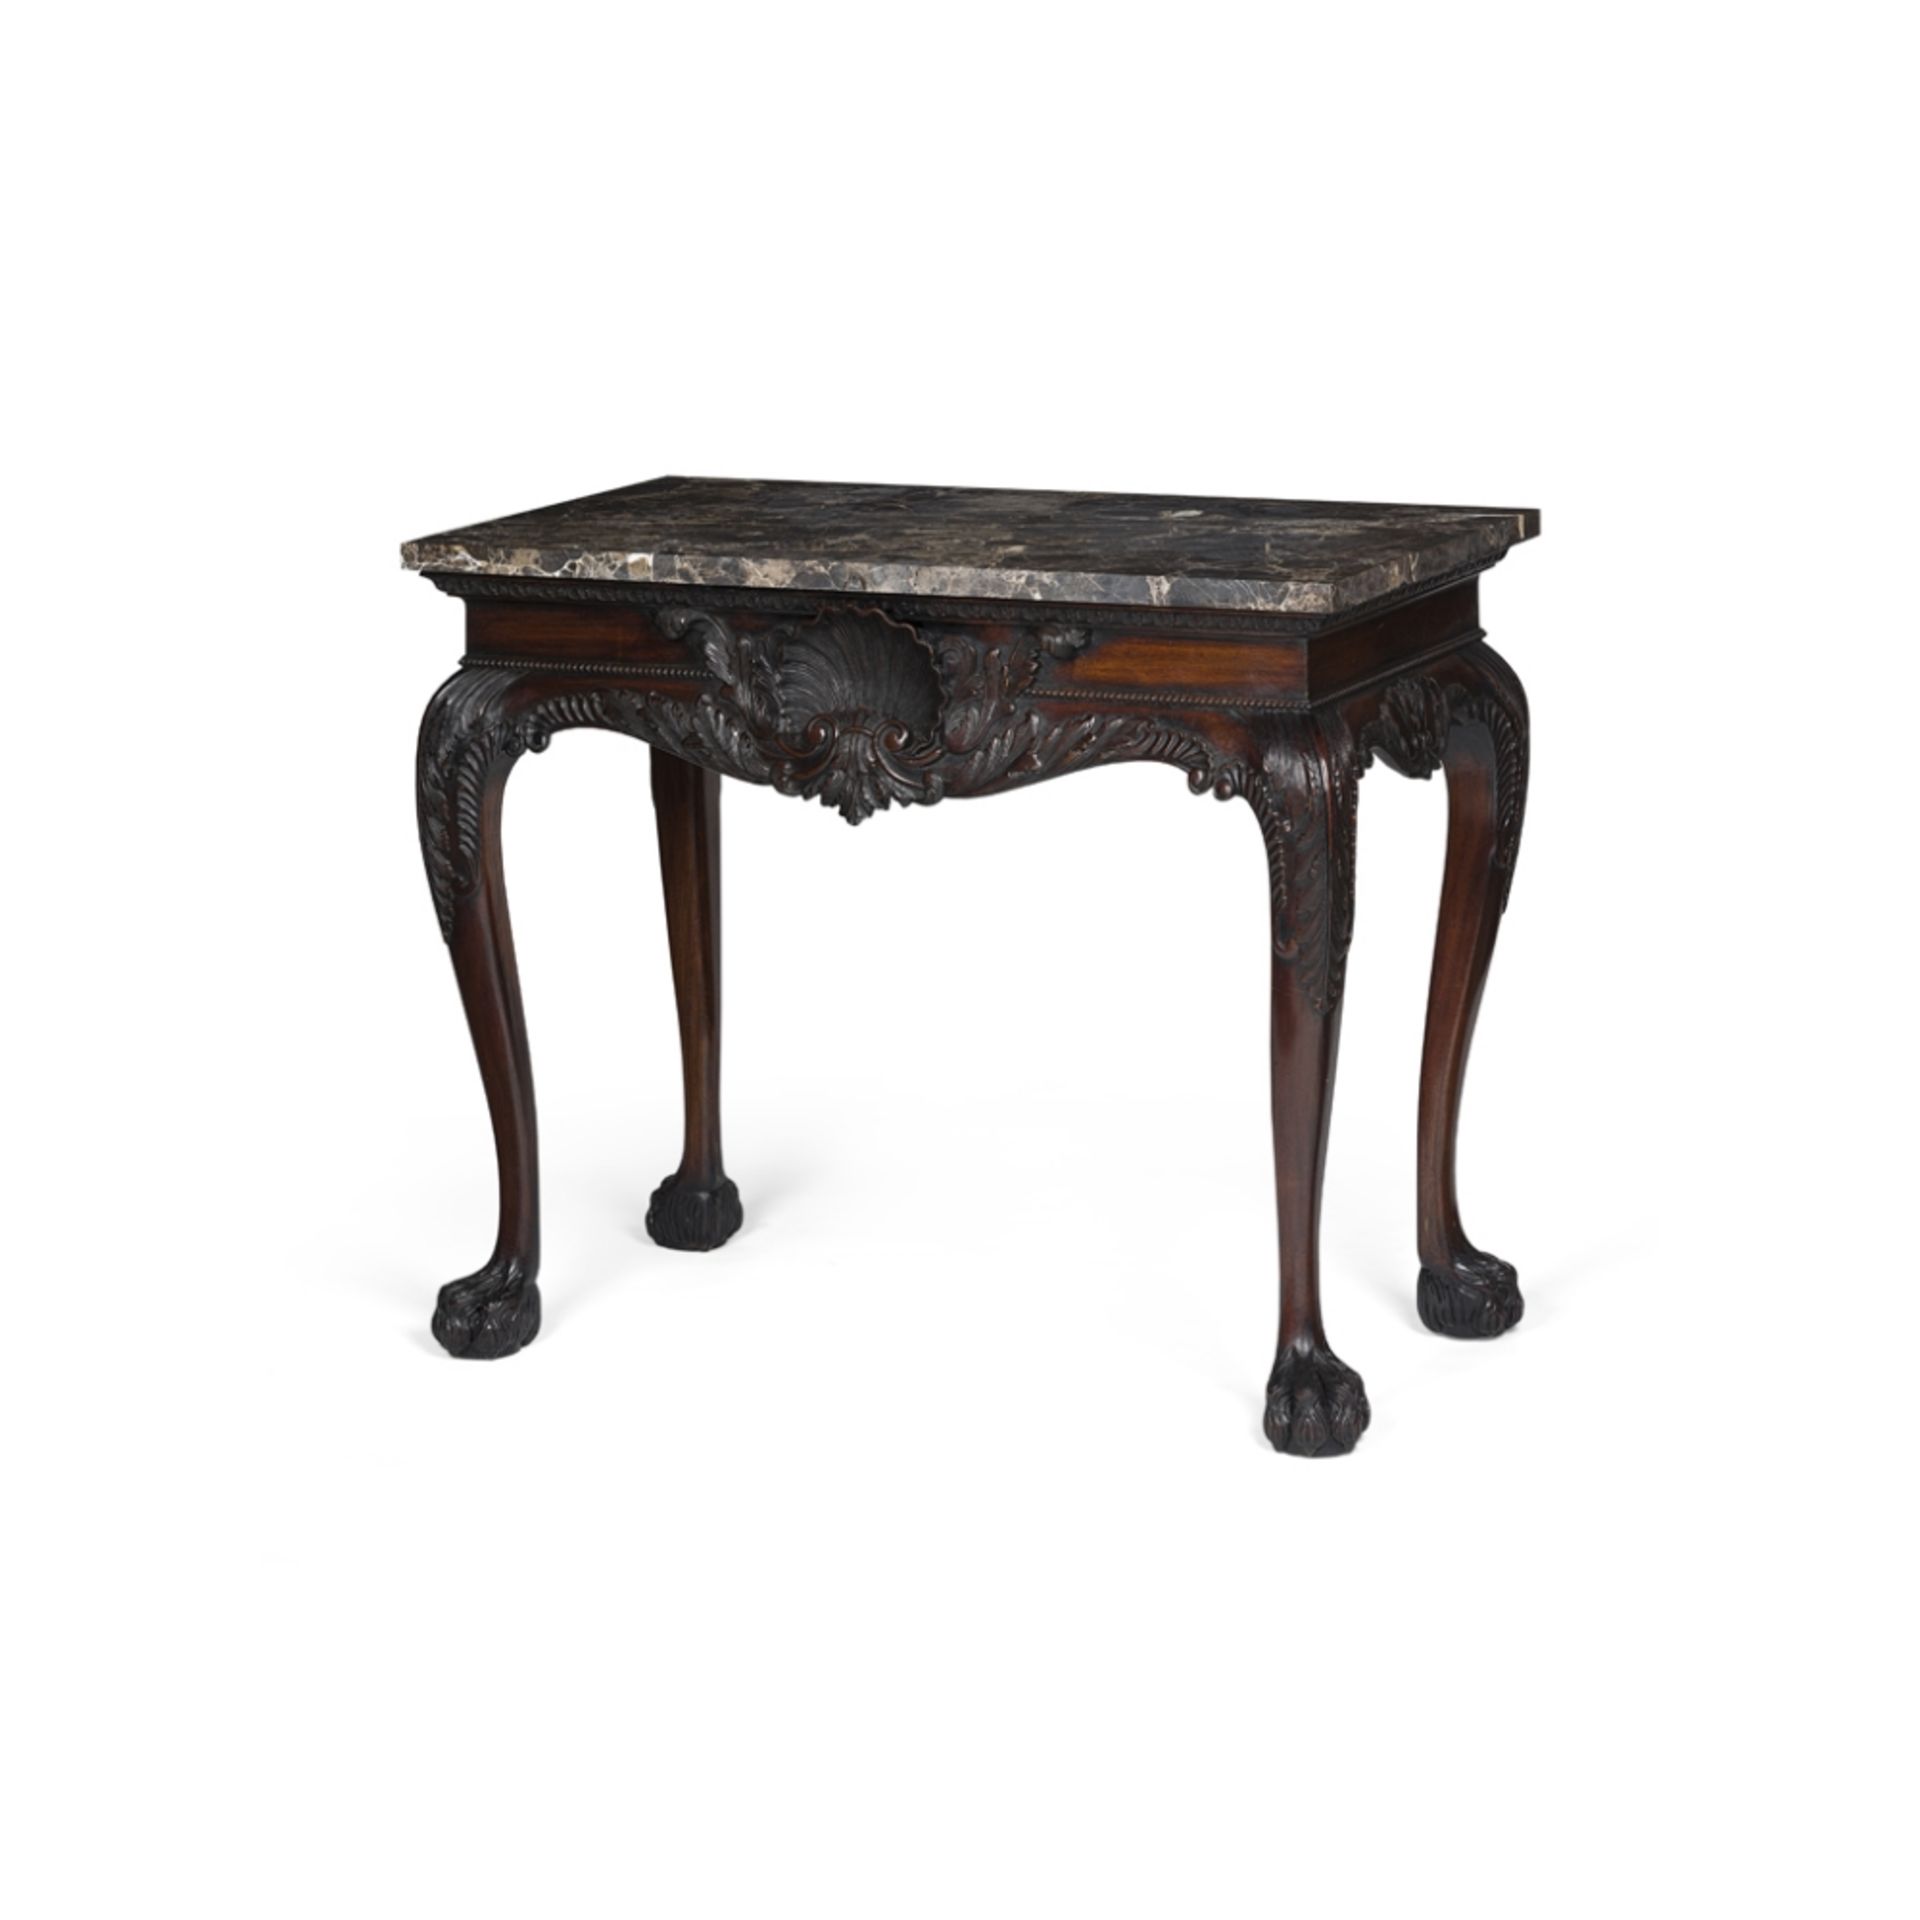 PAIR OF GEORGE II STYLE MAHOGANY MARBLE TOP SIDE TABLES, IN THE MANNER OF HICKS OF DUBLINMODERN - Image 3 of 3